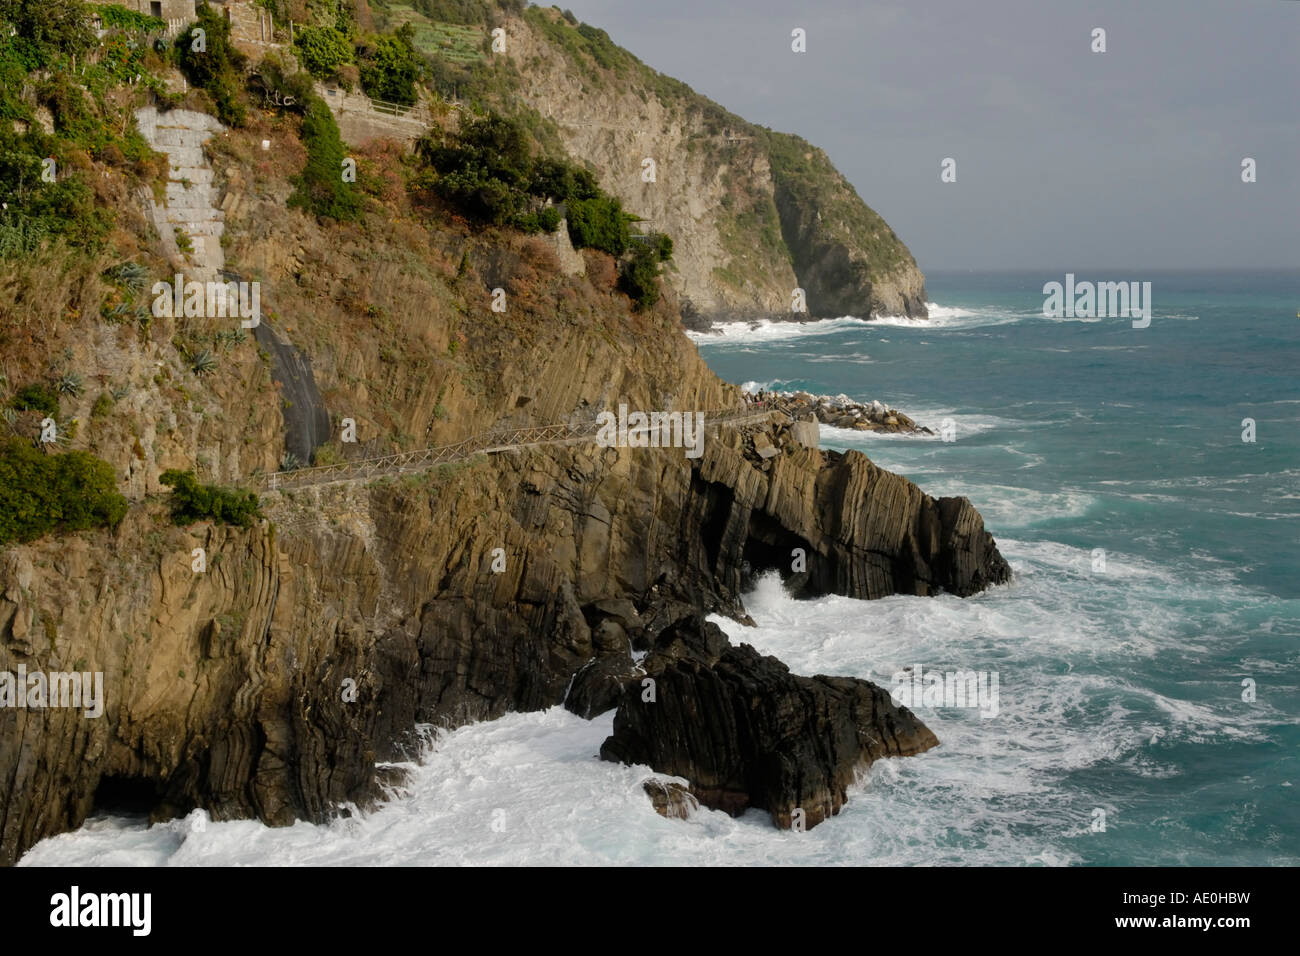 Cinque Terre cliff side walking trail Stock Photo